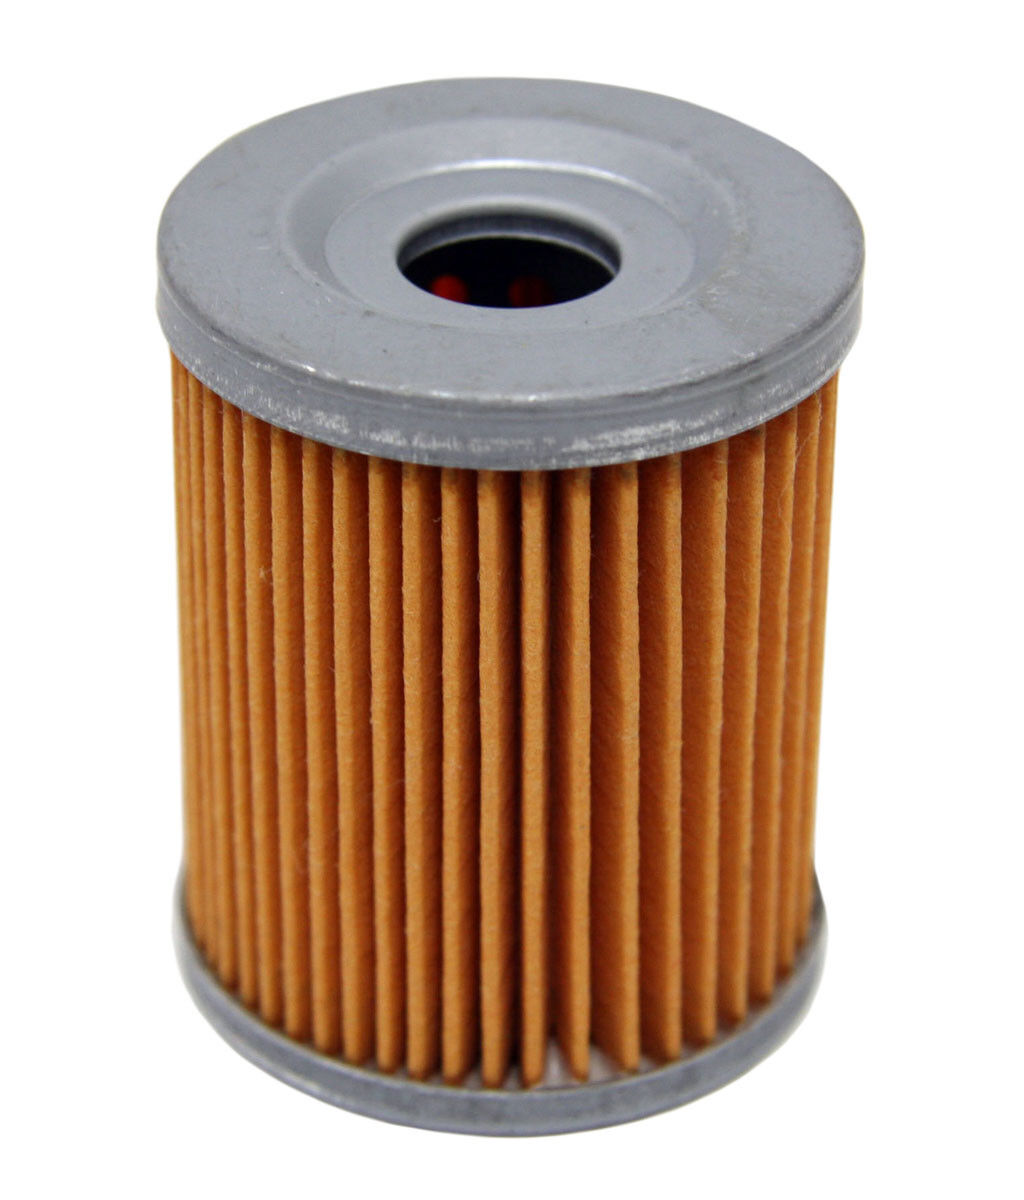 Factory Spec Oil Filter for Arctic Max 63% OFF 250 Cat 4x4 Cheap SALE Start Utility 300 2x4